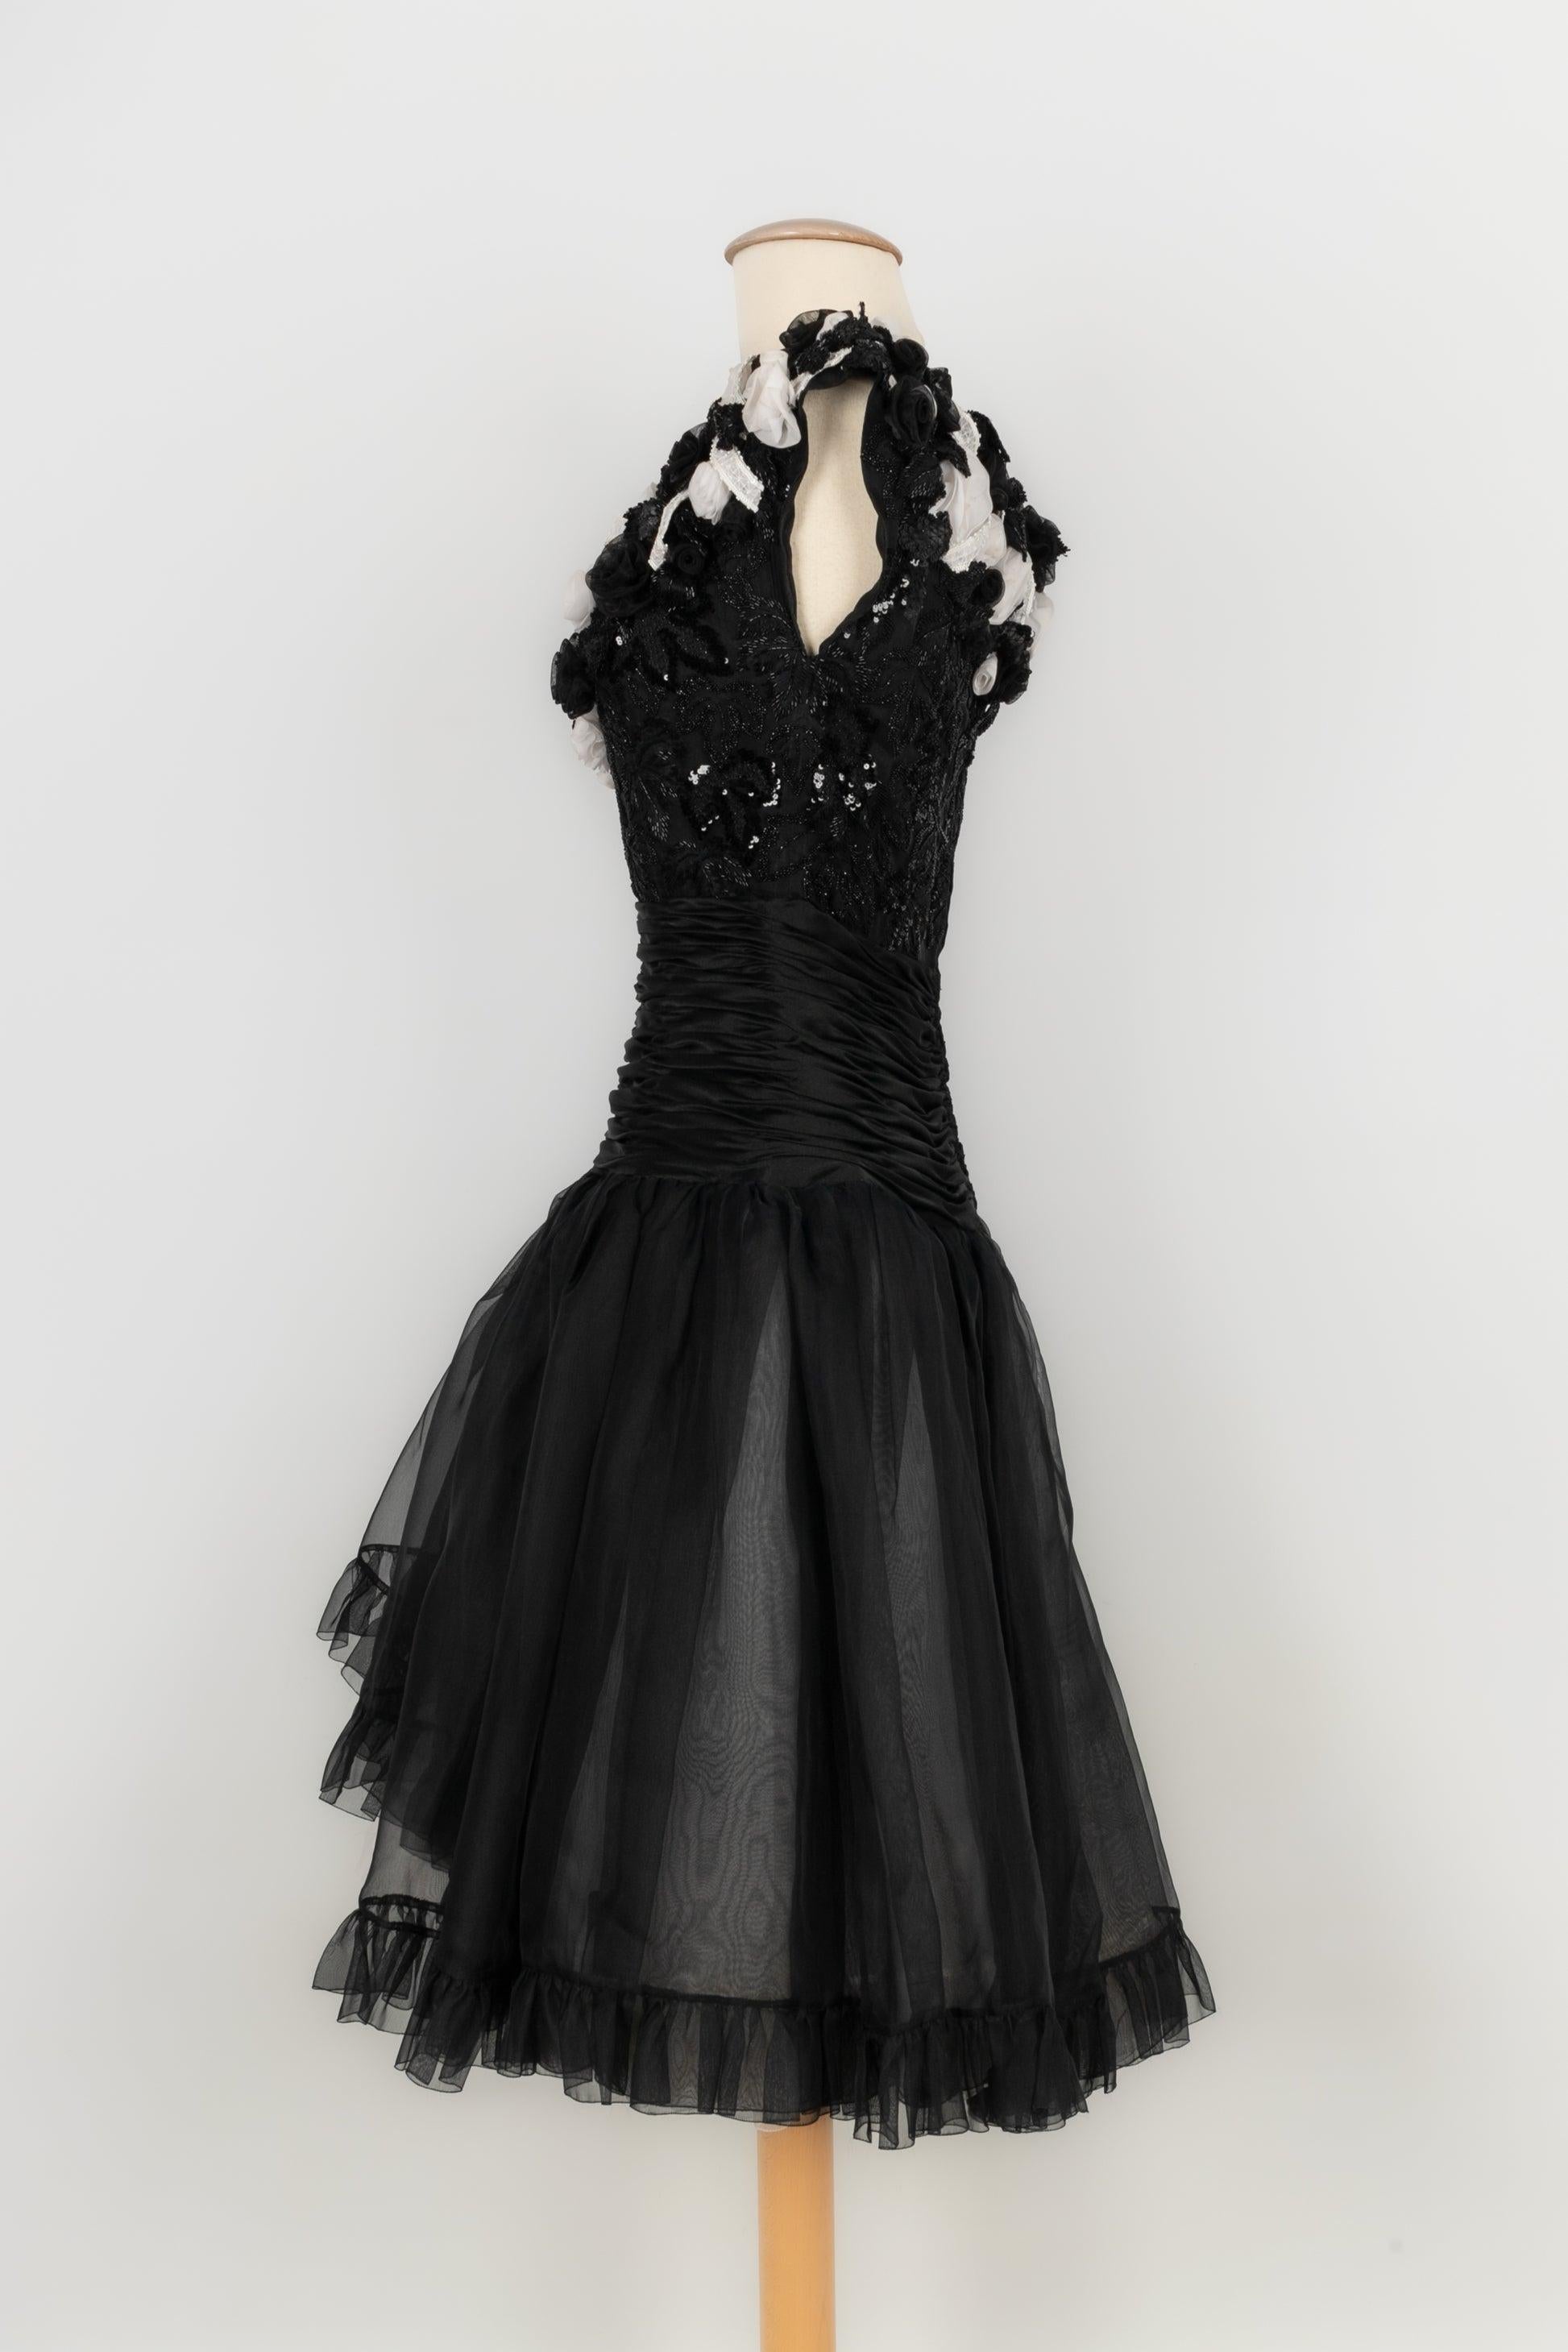 Jean-Louis Scherrer - (Made in France) Black and white organza Haute Couture dress. Black satin pleated waist and bustier embroidered with pearls and black sequins. No size nor composition label, it fits a 34FR/36FR. Piece from the